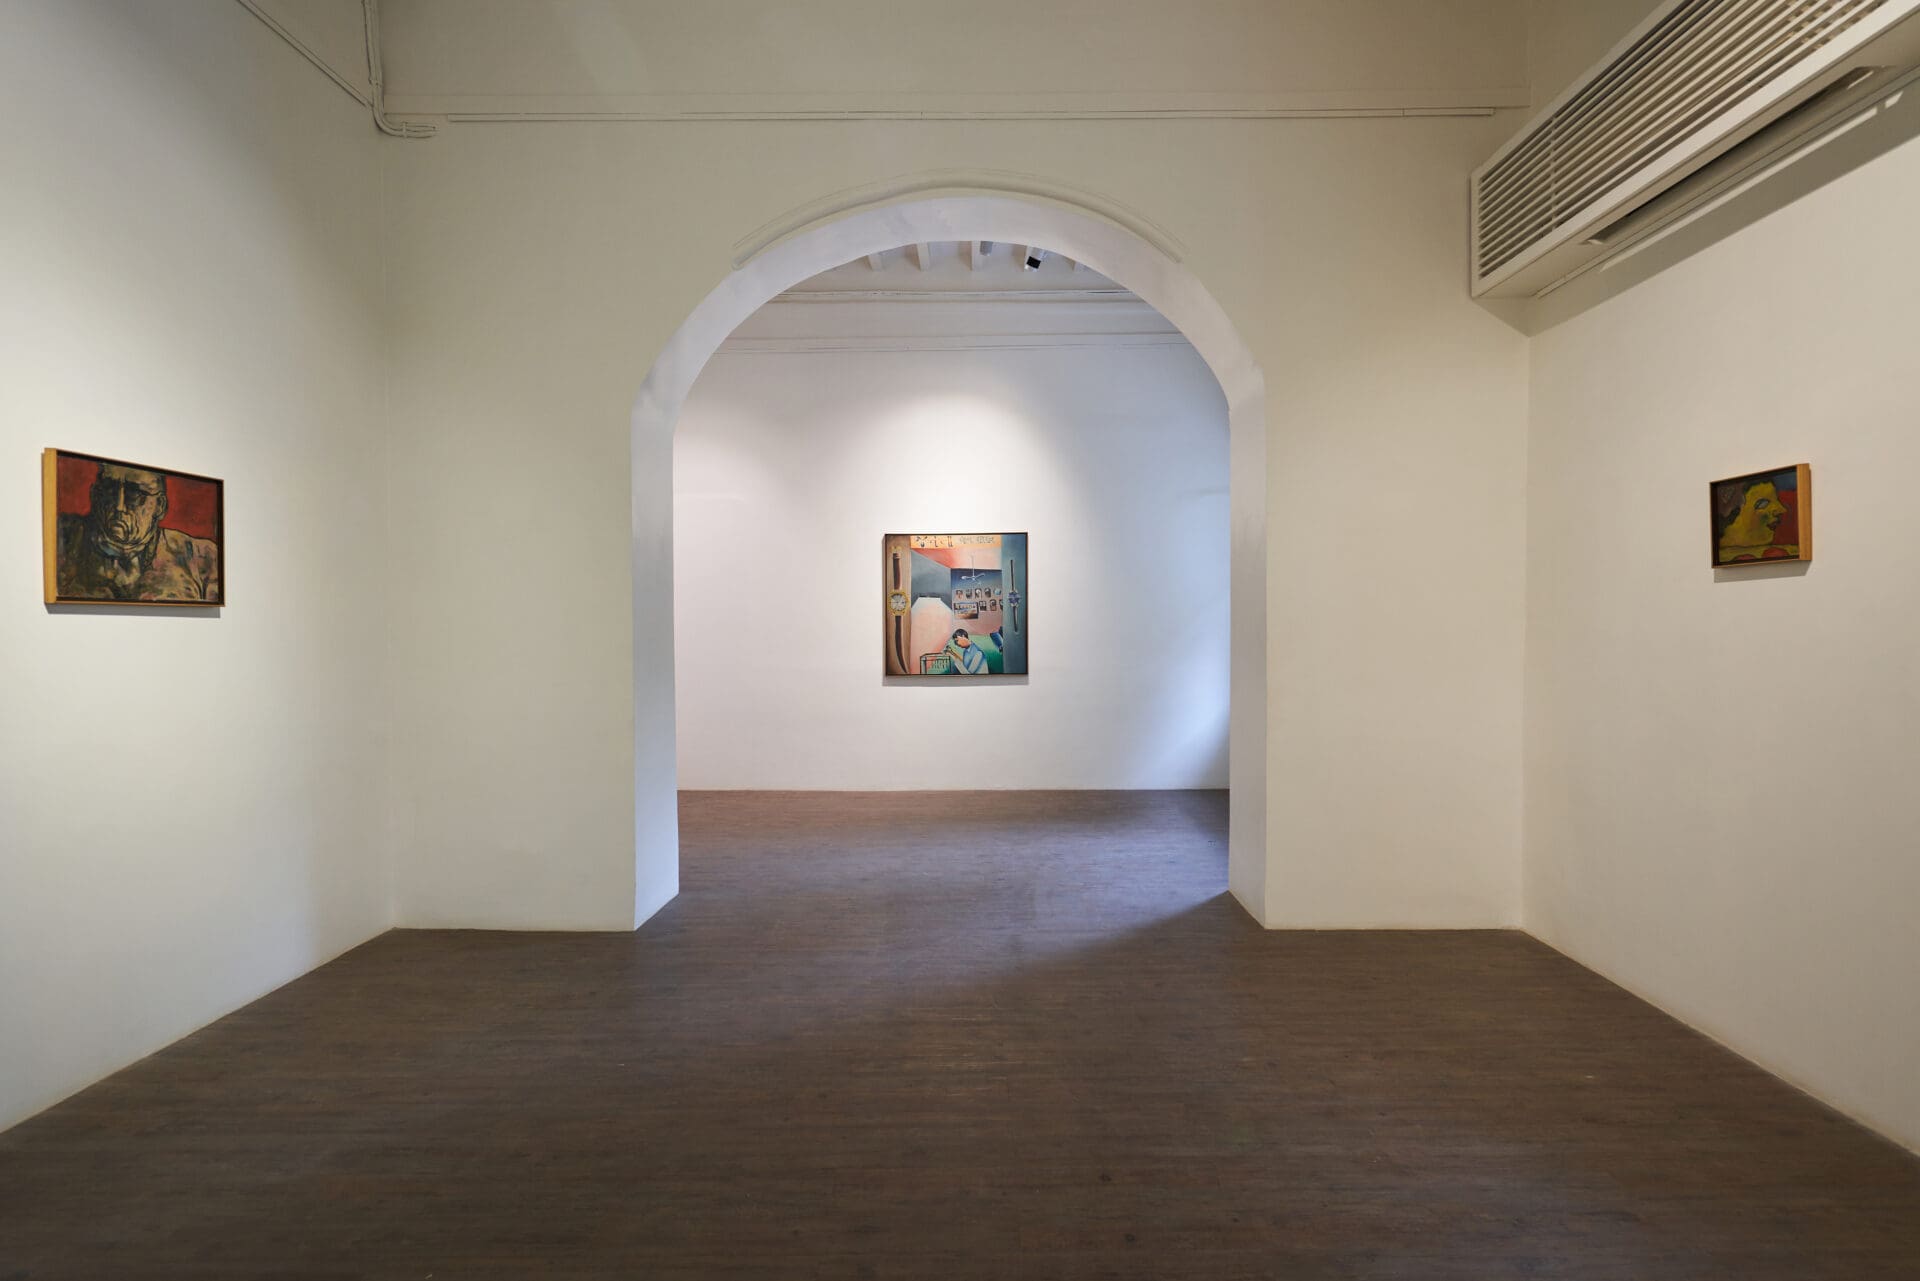 Best art galleries in Mumbai | A view inside Akara Art, with small paintings hung on the white walls, with one visible through a wide archway.